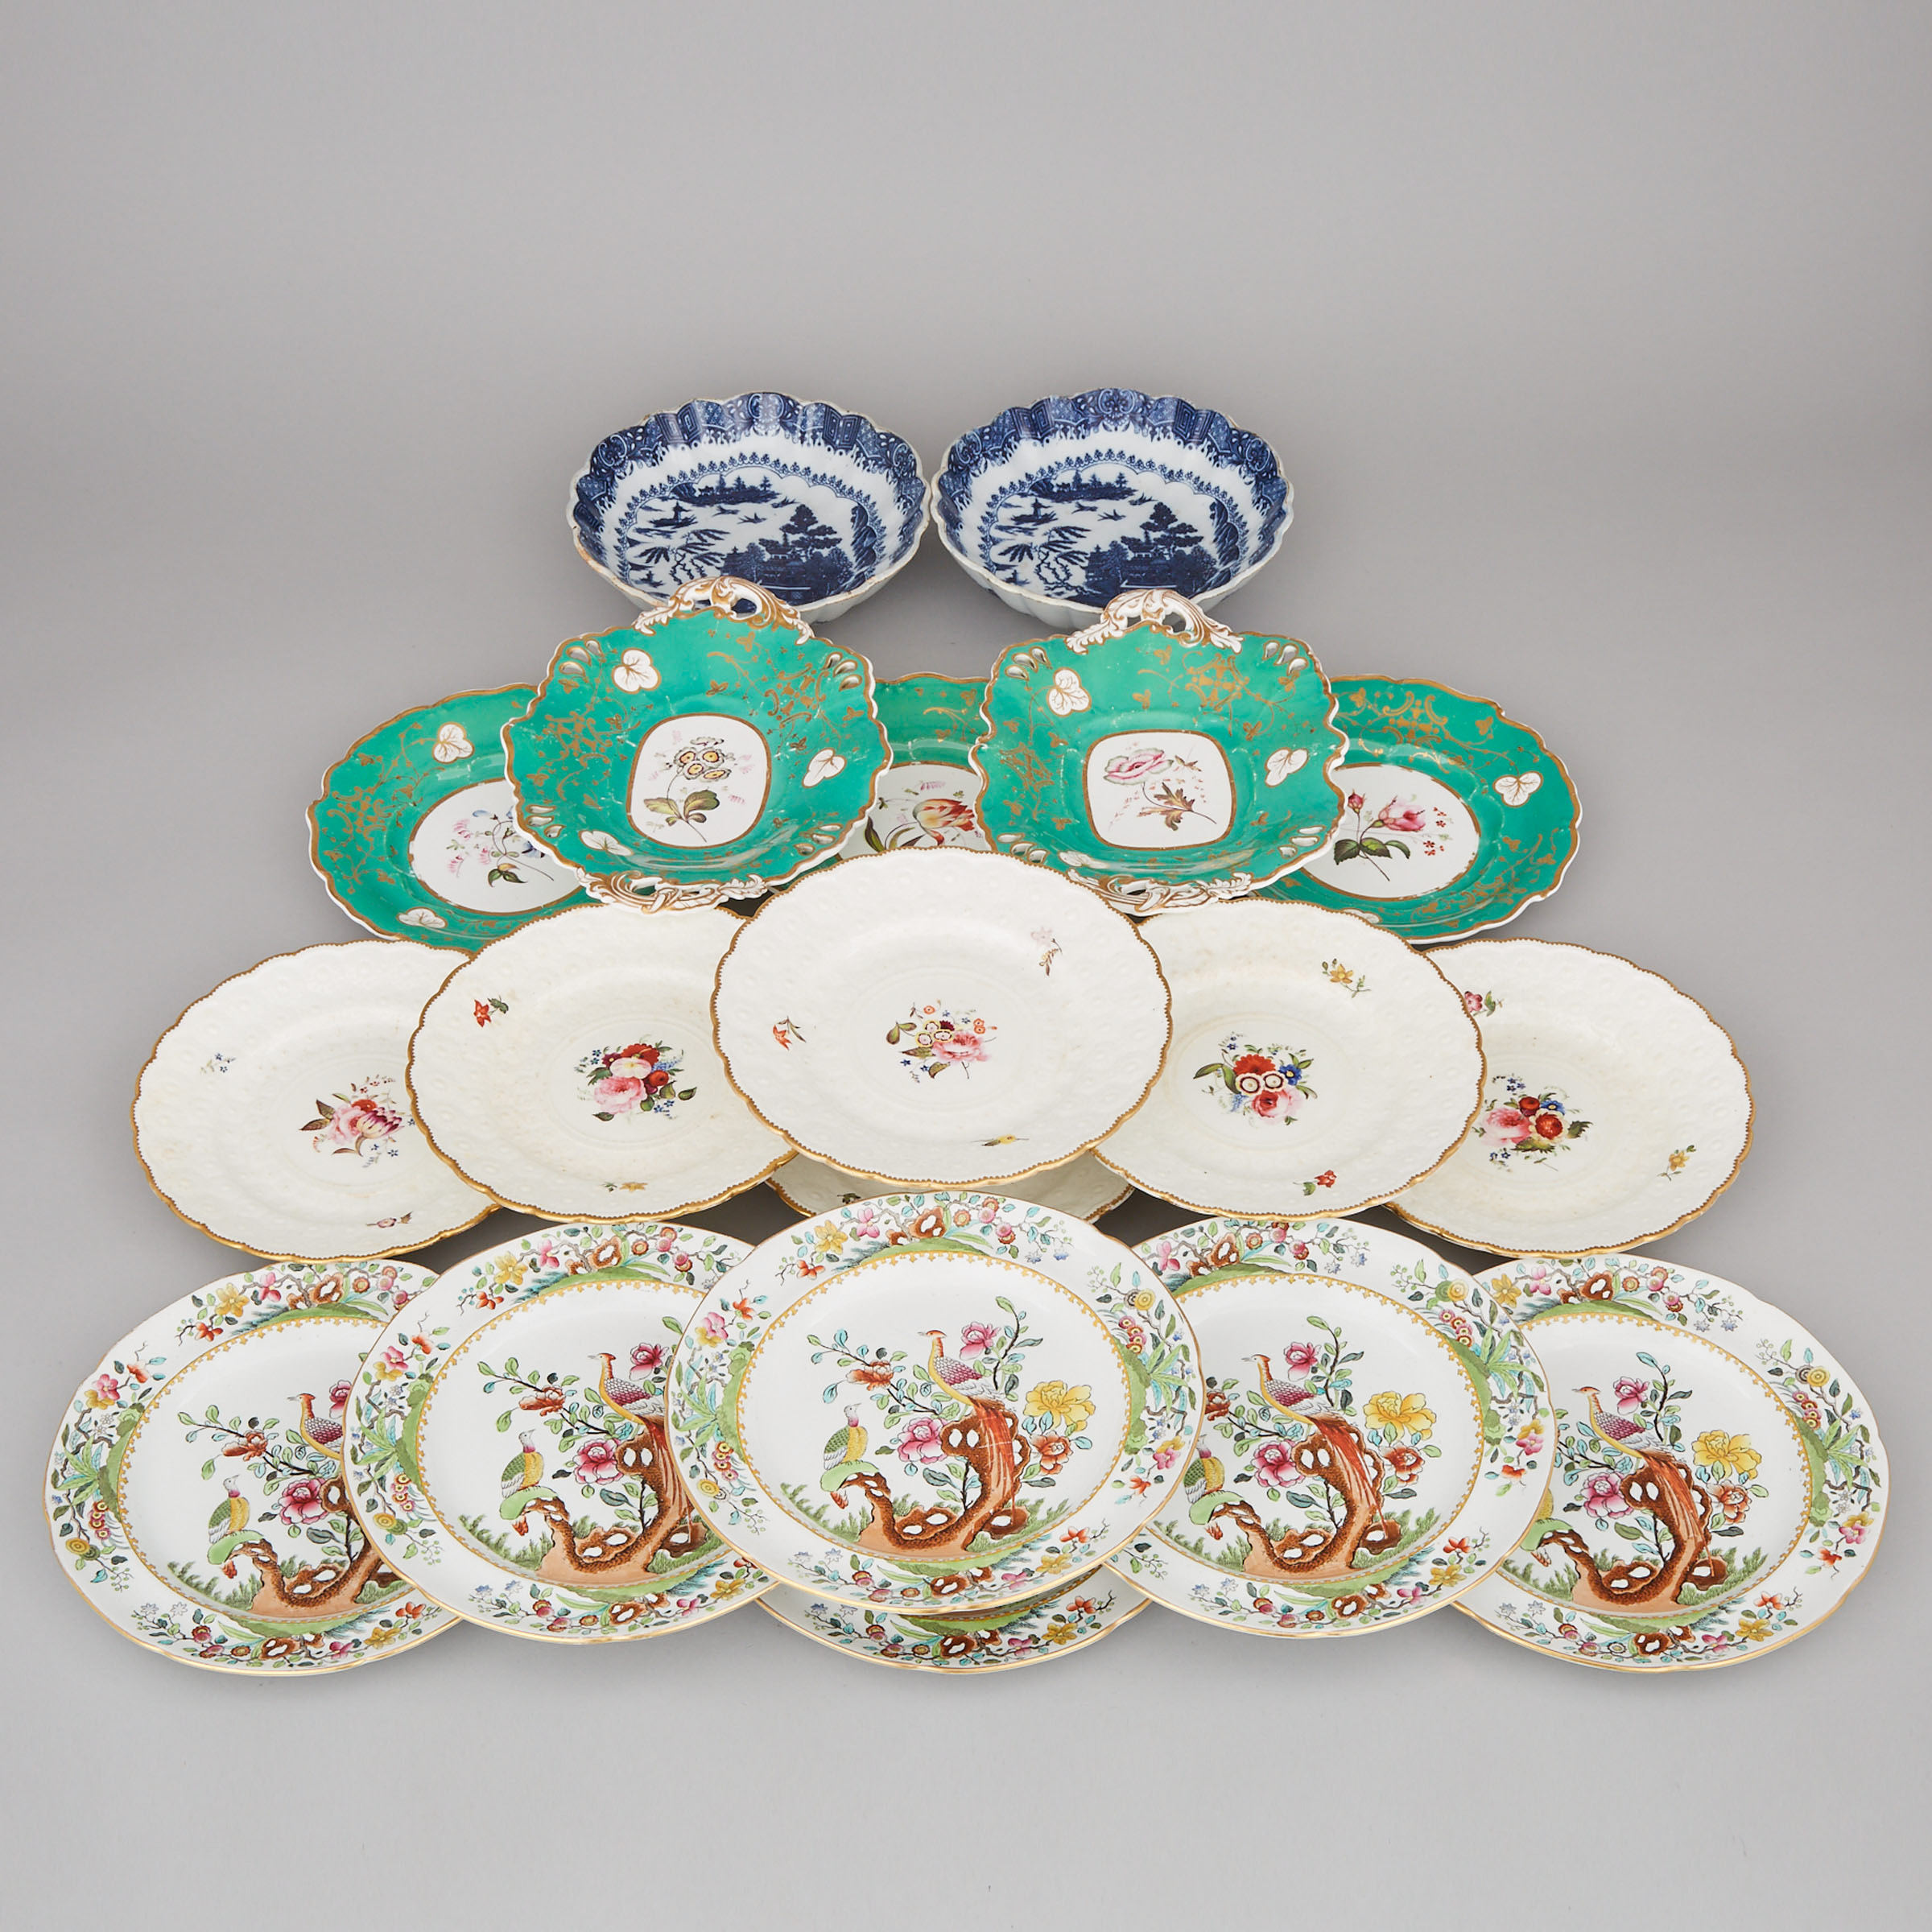 Group of English Porcelain and Pottery Tablewares, 19th century